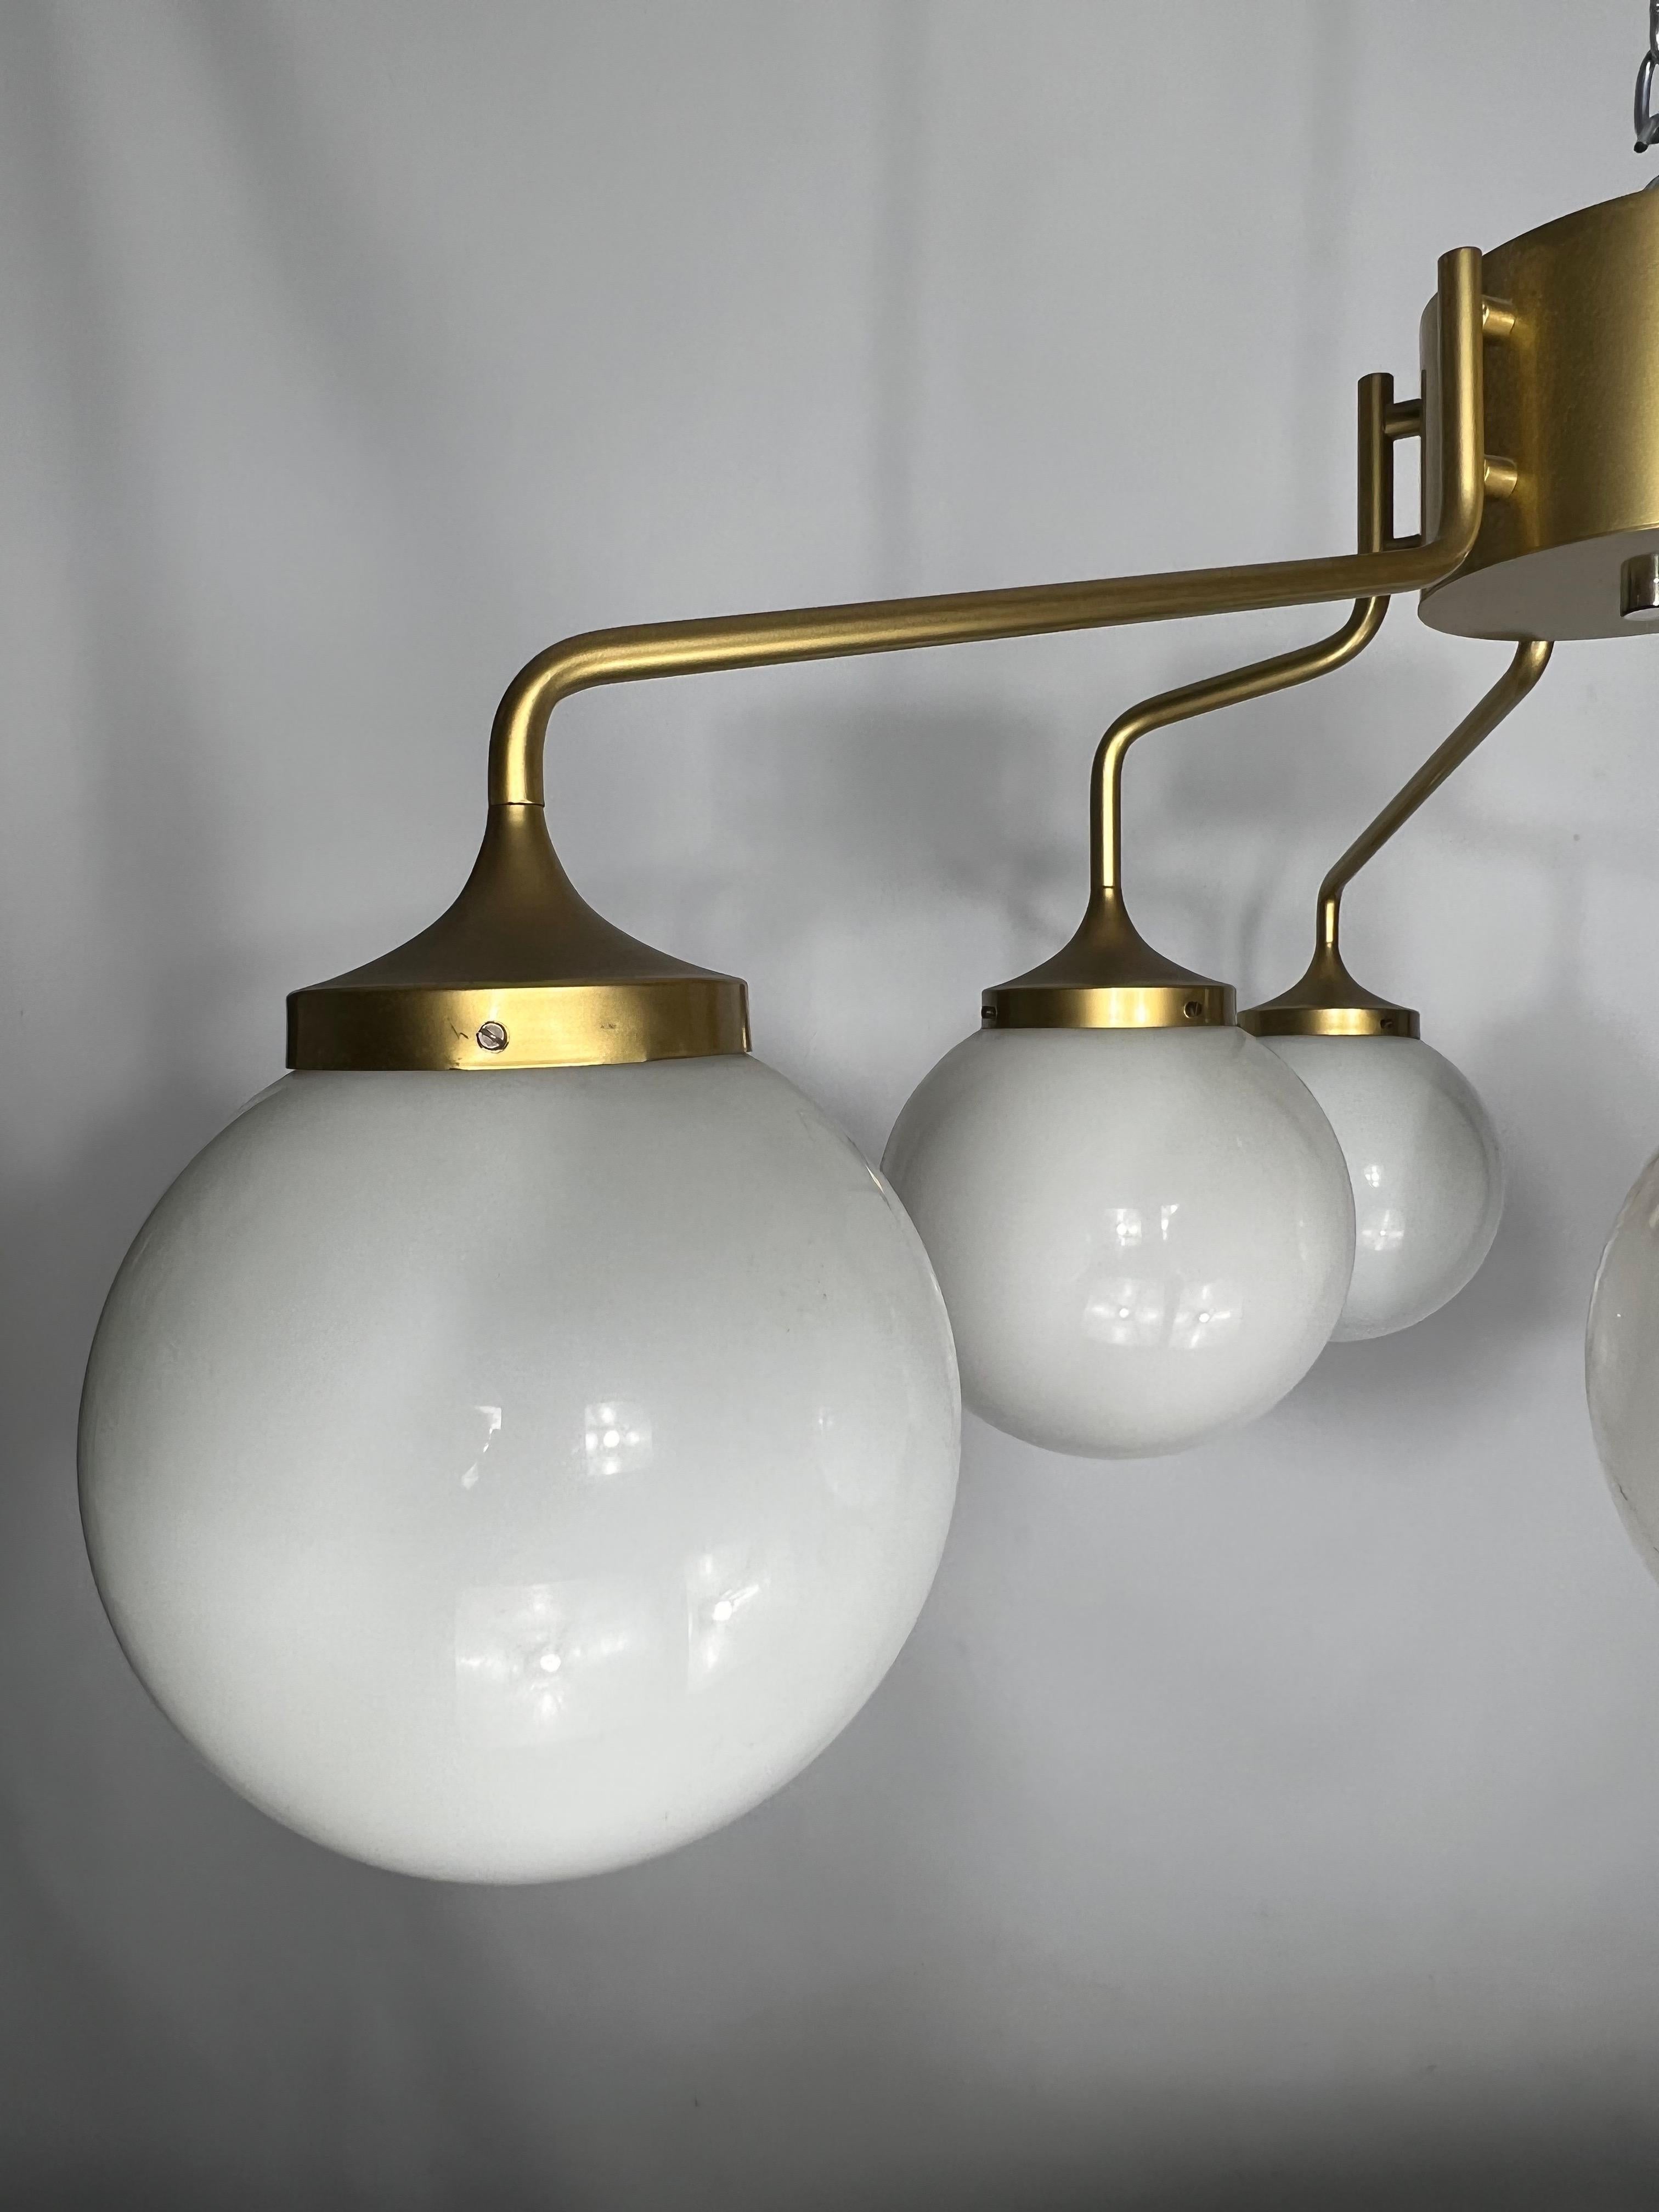 Monumental Mid-Century Brass and Milk Glass Ceiling Lamp by Reggiani, Italy 1970 For Sale 3